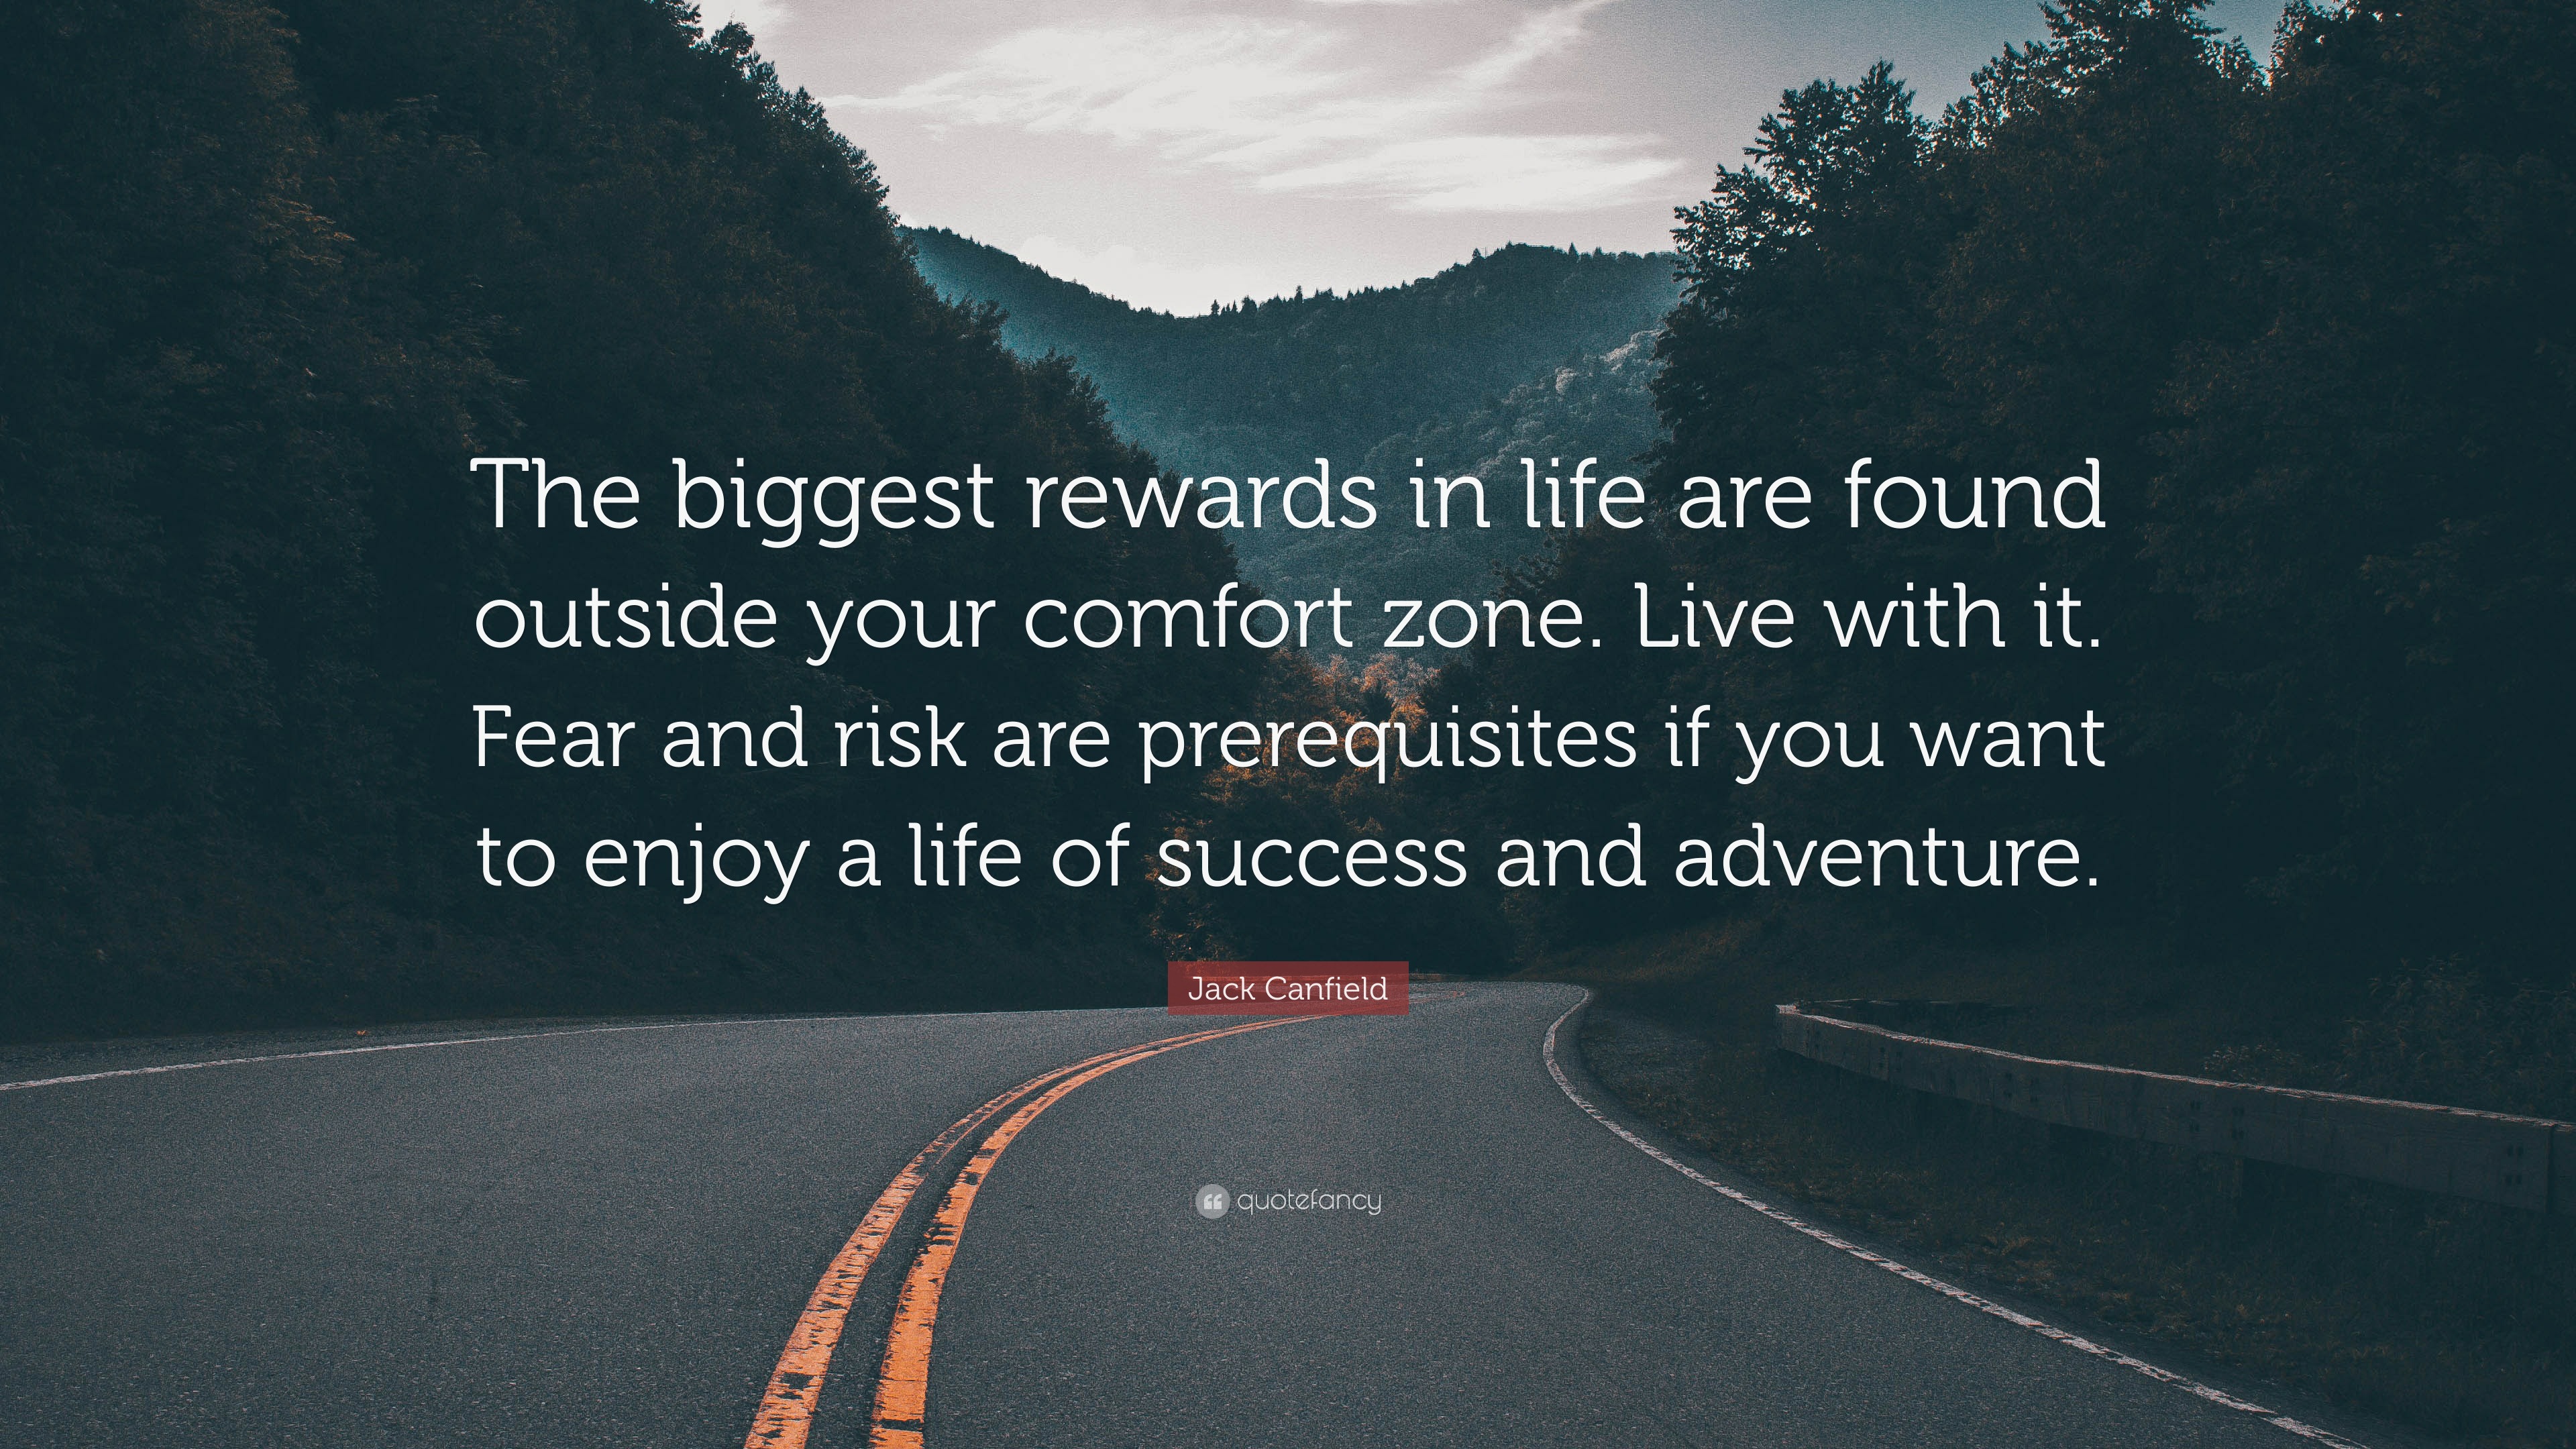 Jack Canfield Quote The Biggest Rewards In Life Are Found Outside Your Comfort Zone Live With It Fear And Risk Are Prerequisites If You Wa 10 Wallpapers Quotefancy